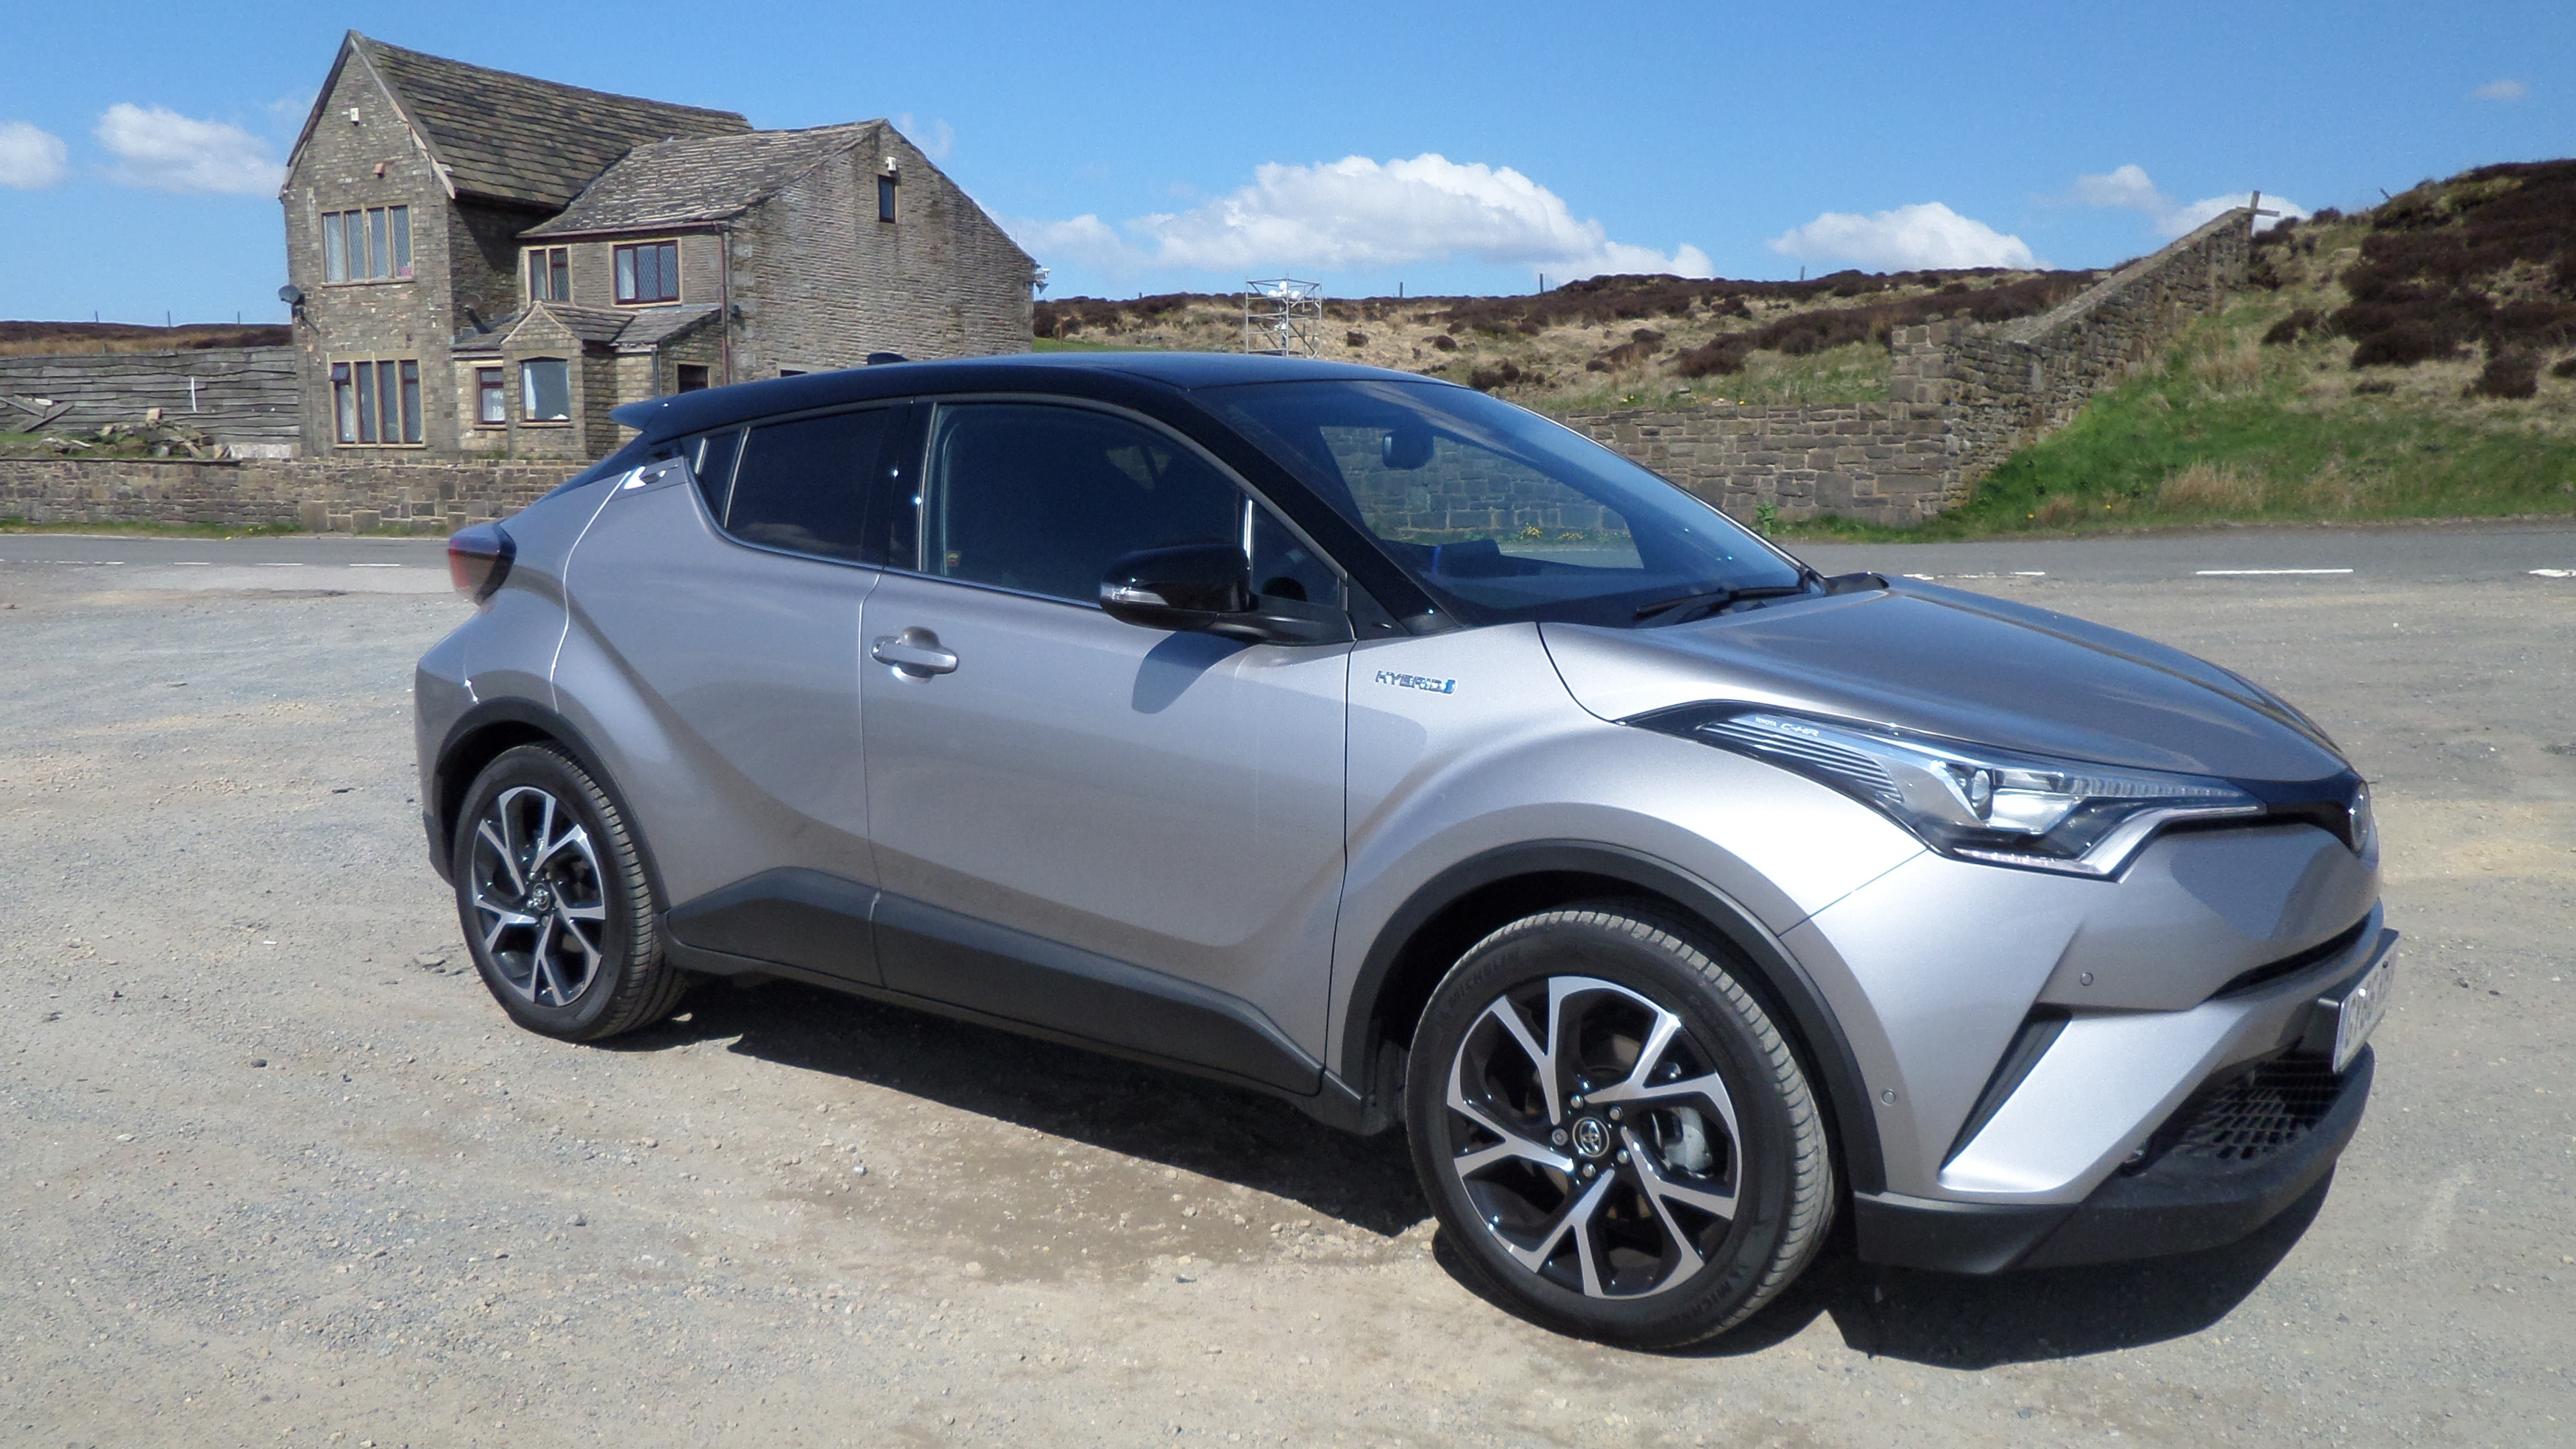 Review: The Toyota C-HR Hybrid is a mass-market vehicle with panache